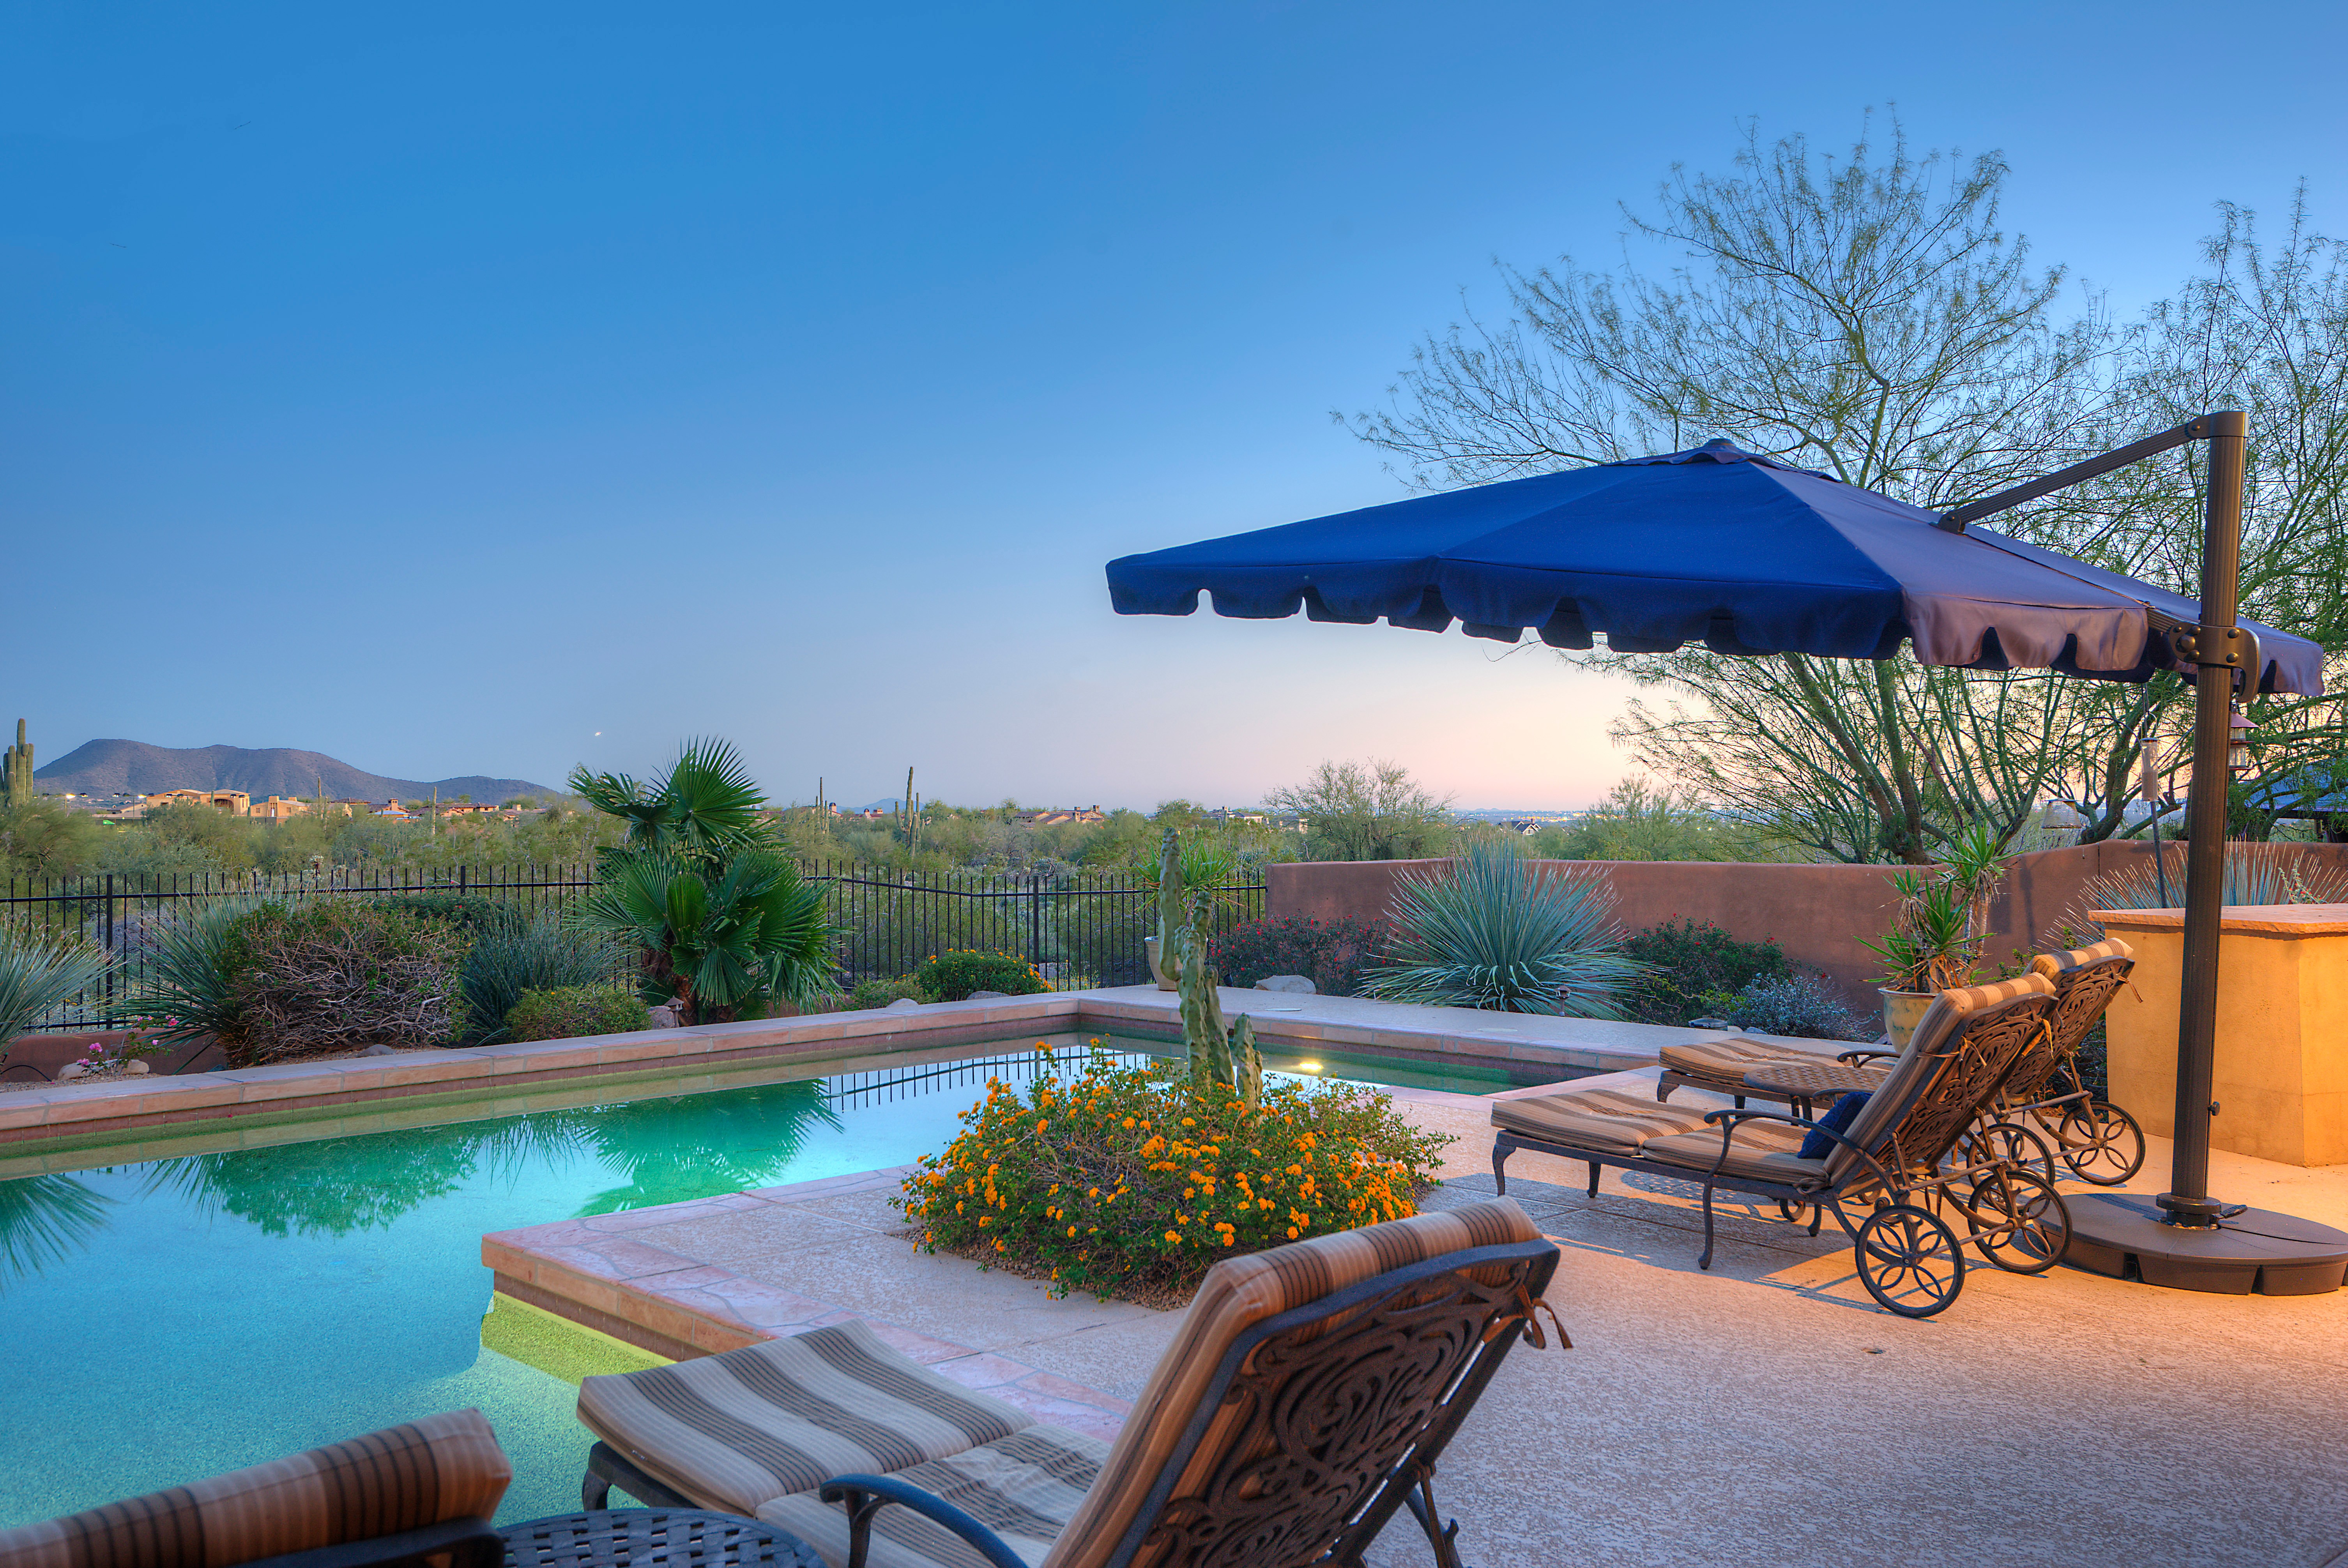 Poolside luxury at this Scottsdale home for sale in DC Ranch located at 19829 N 97th Pl Scottsdale, AZ 85255 listed by Don Matheson at The Matheson Team